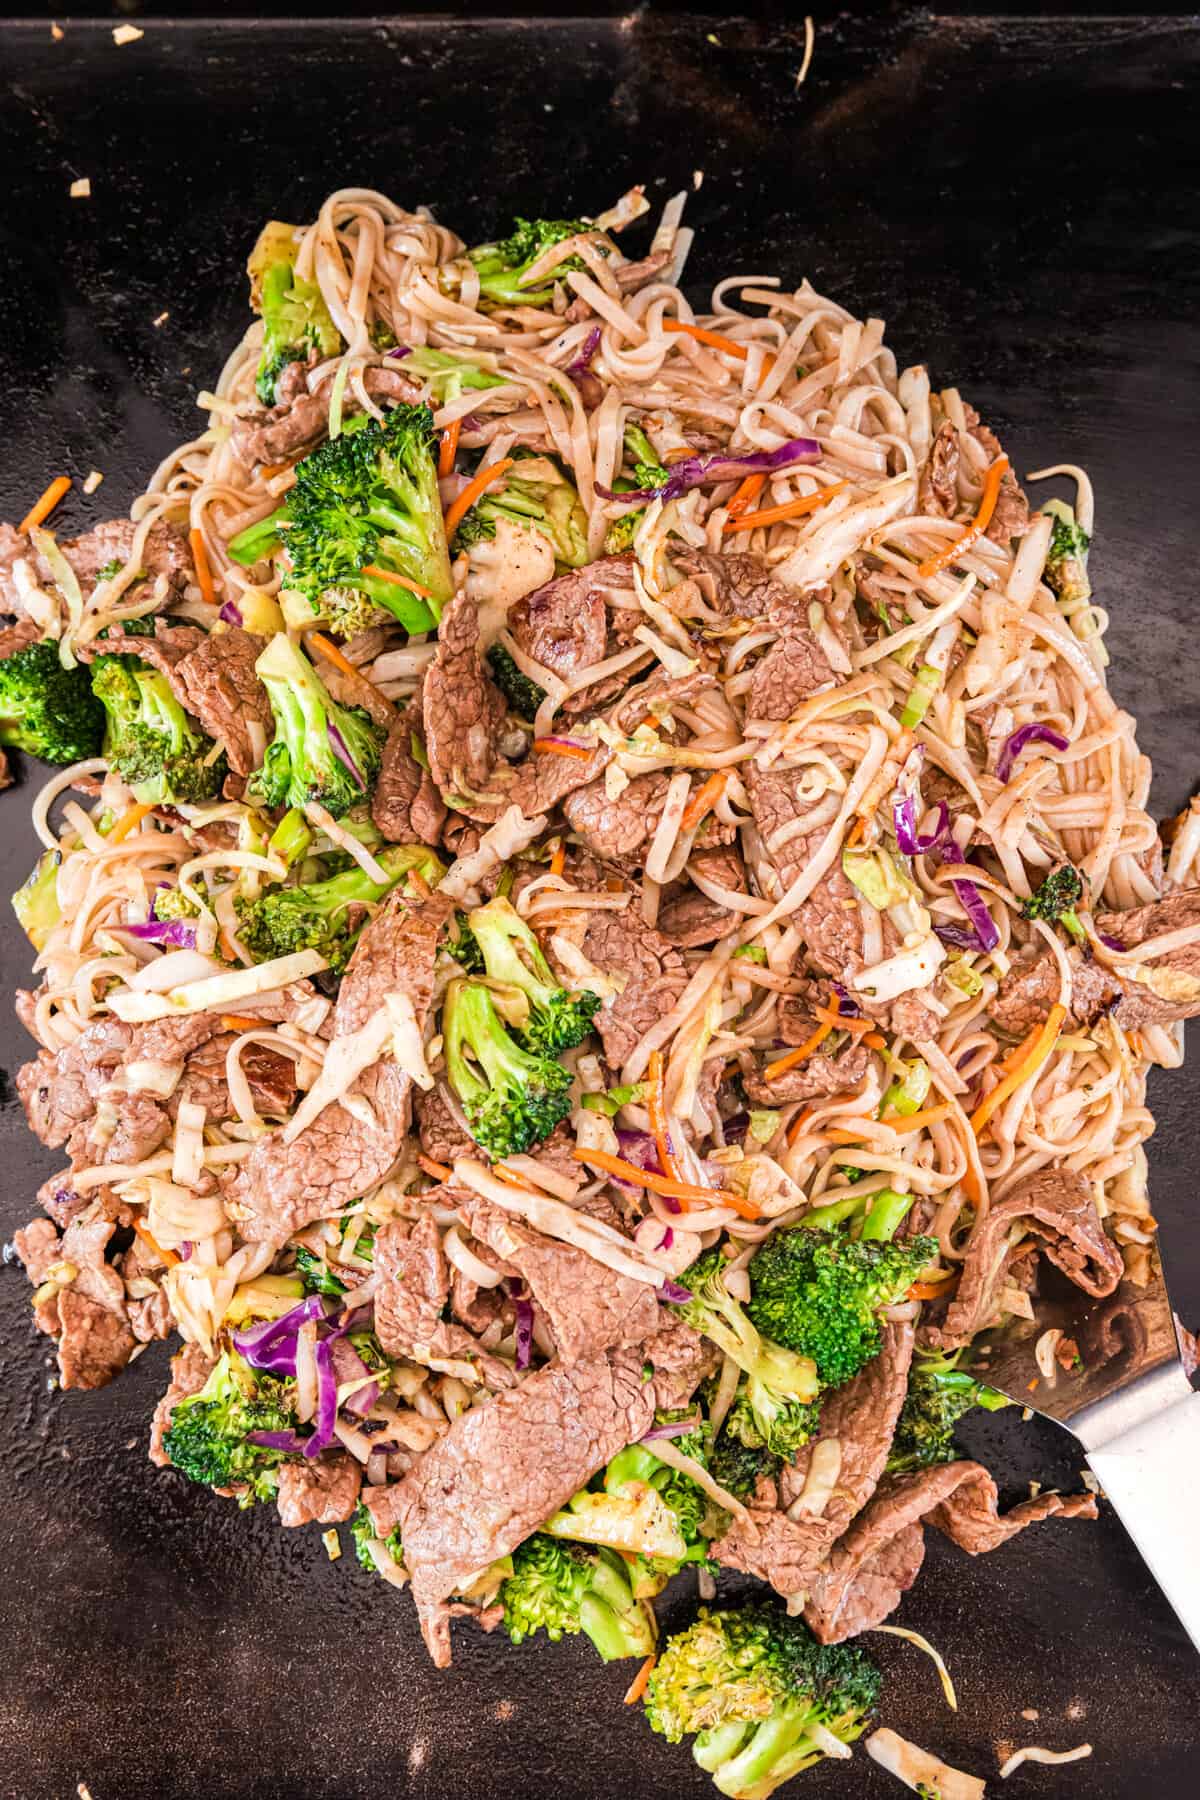 Combined ingredients for Blackstone Beef Stir Fry recipe